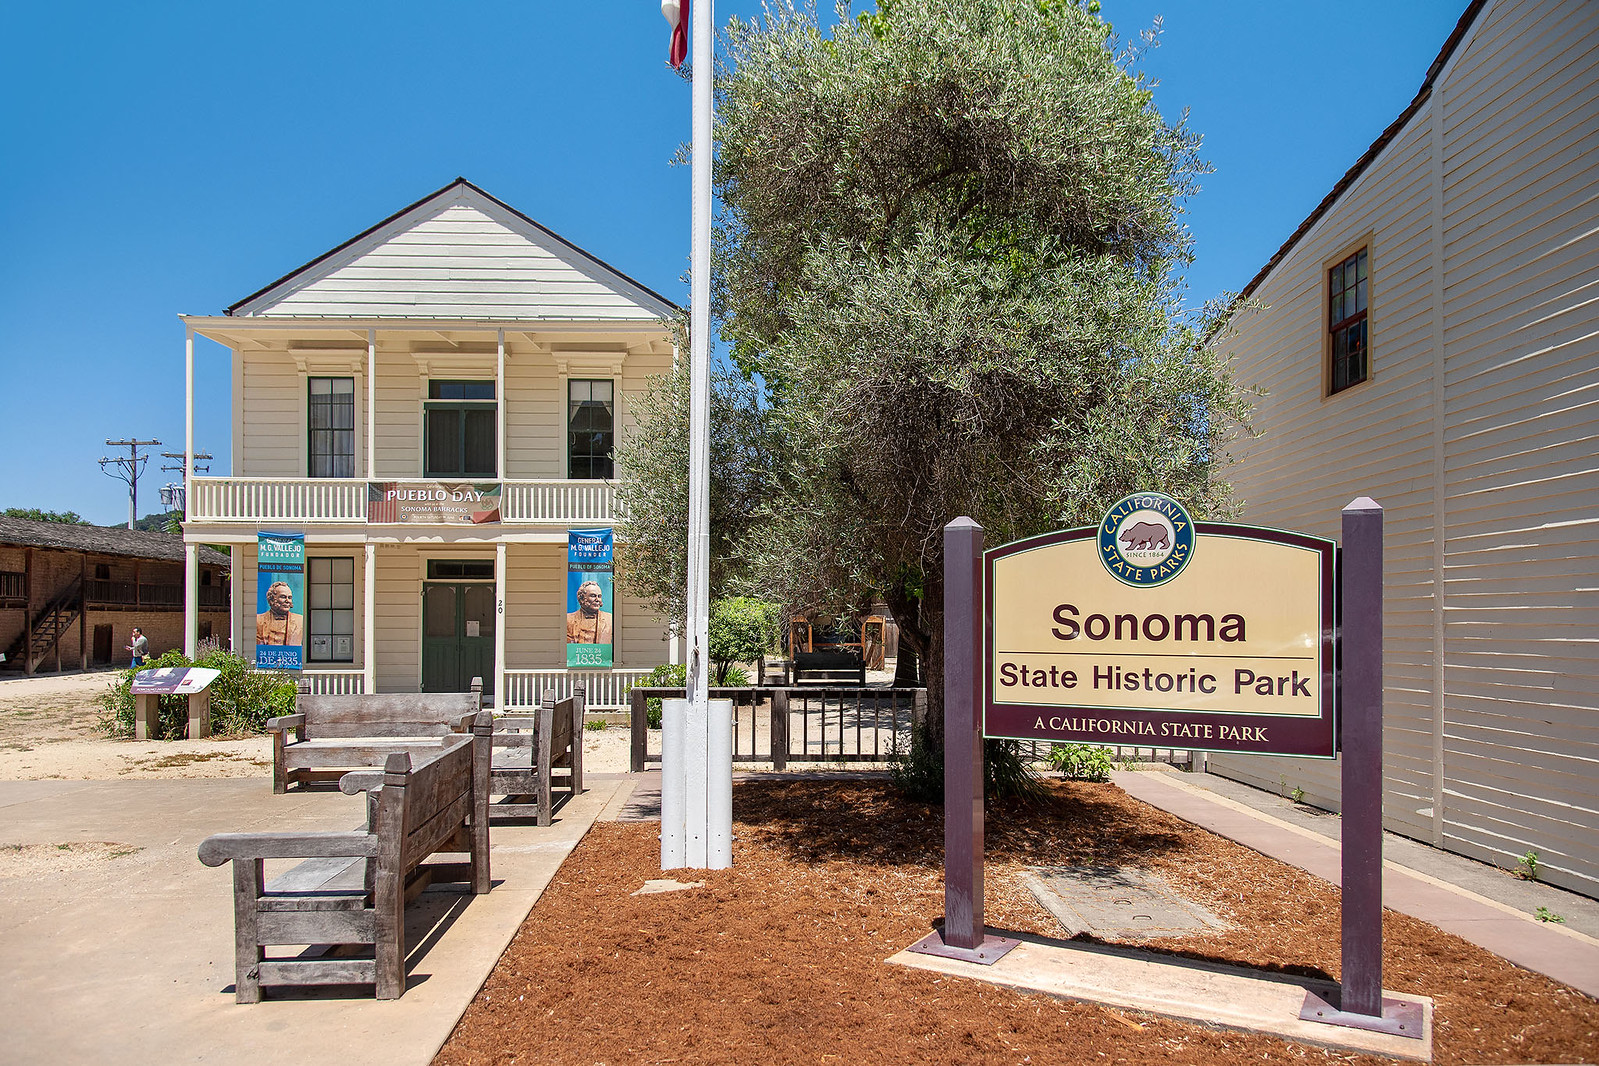 Cover Image for 339-345 Lake Street, Sonoma presented by Daniel Casabonne